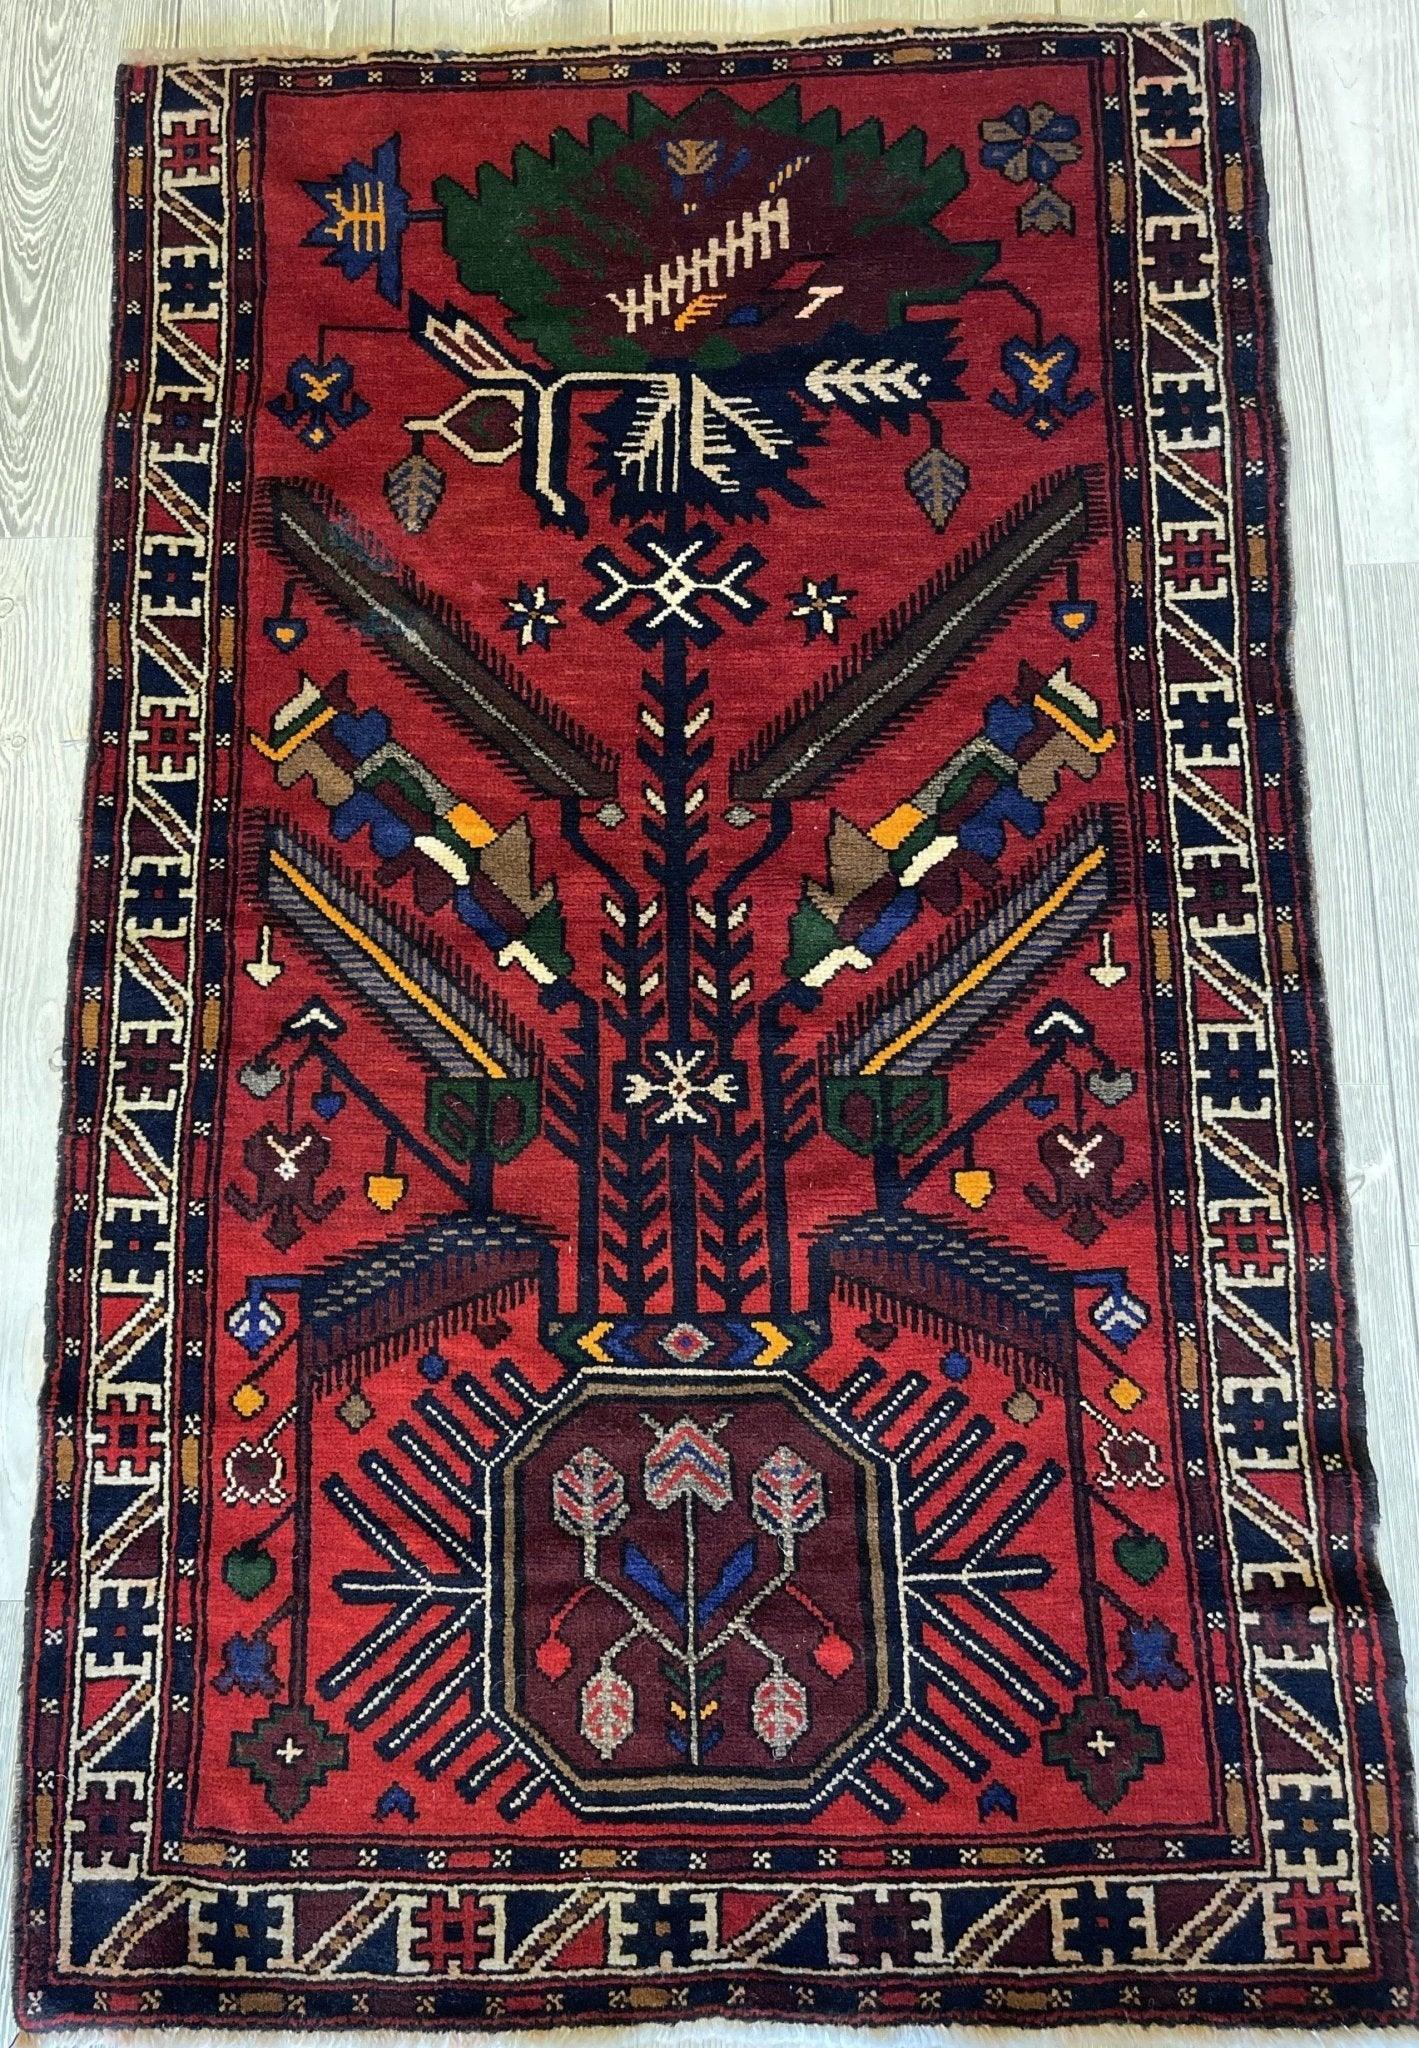 Authentic Hand Knotted Vintage Afghani Adraskan Baluchi Wool Area Rug 5' x 3' ft